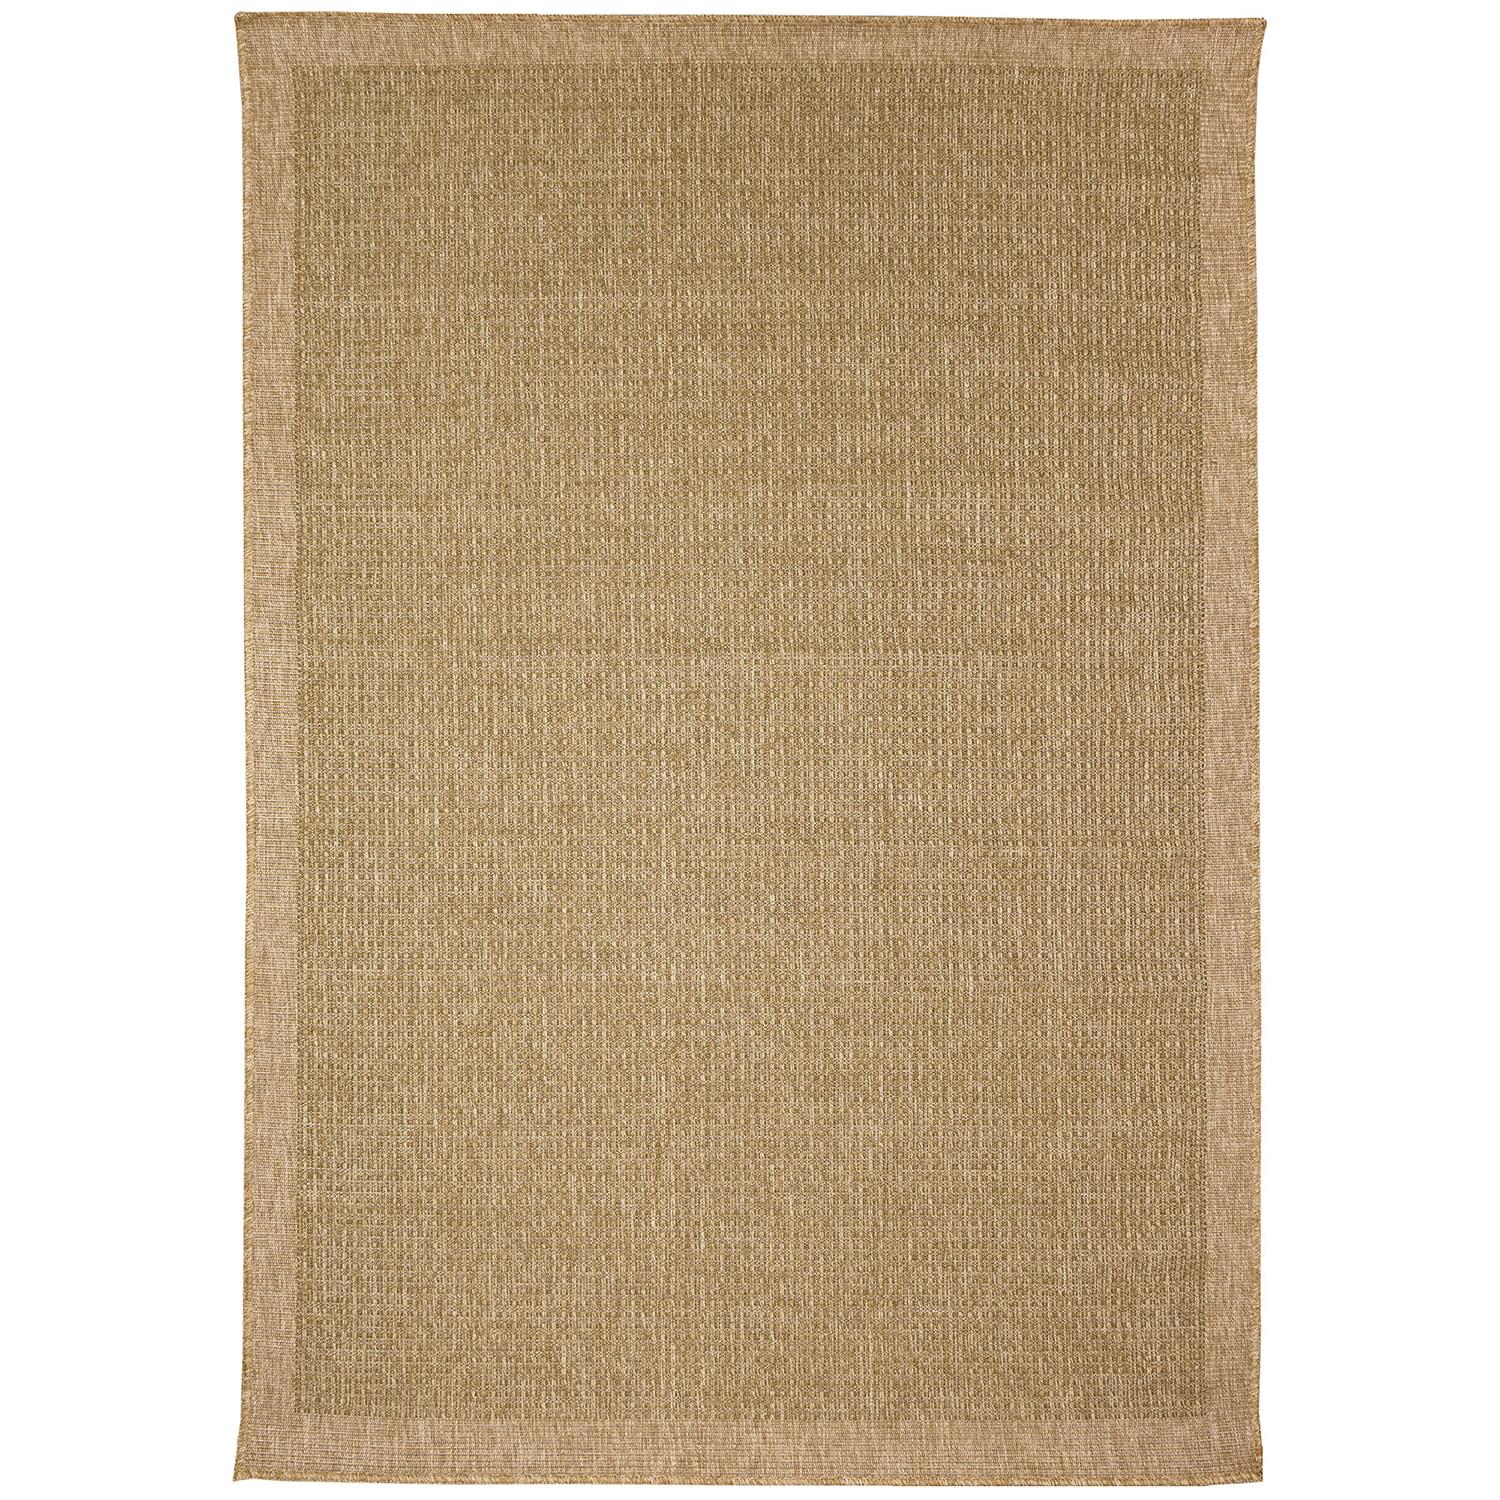 Liora Manne Sahara Low Profile  Easy Care Woven Weather Resistant Rug- Texture Border Green  Product Image